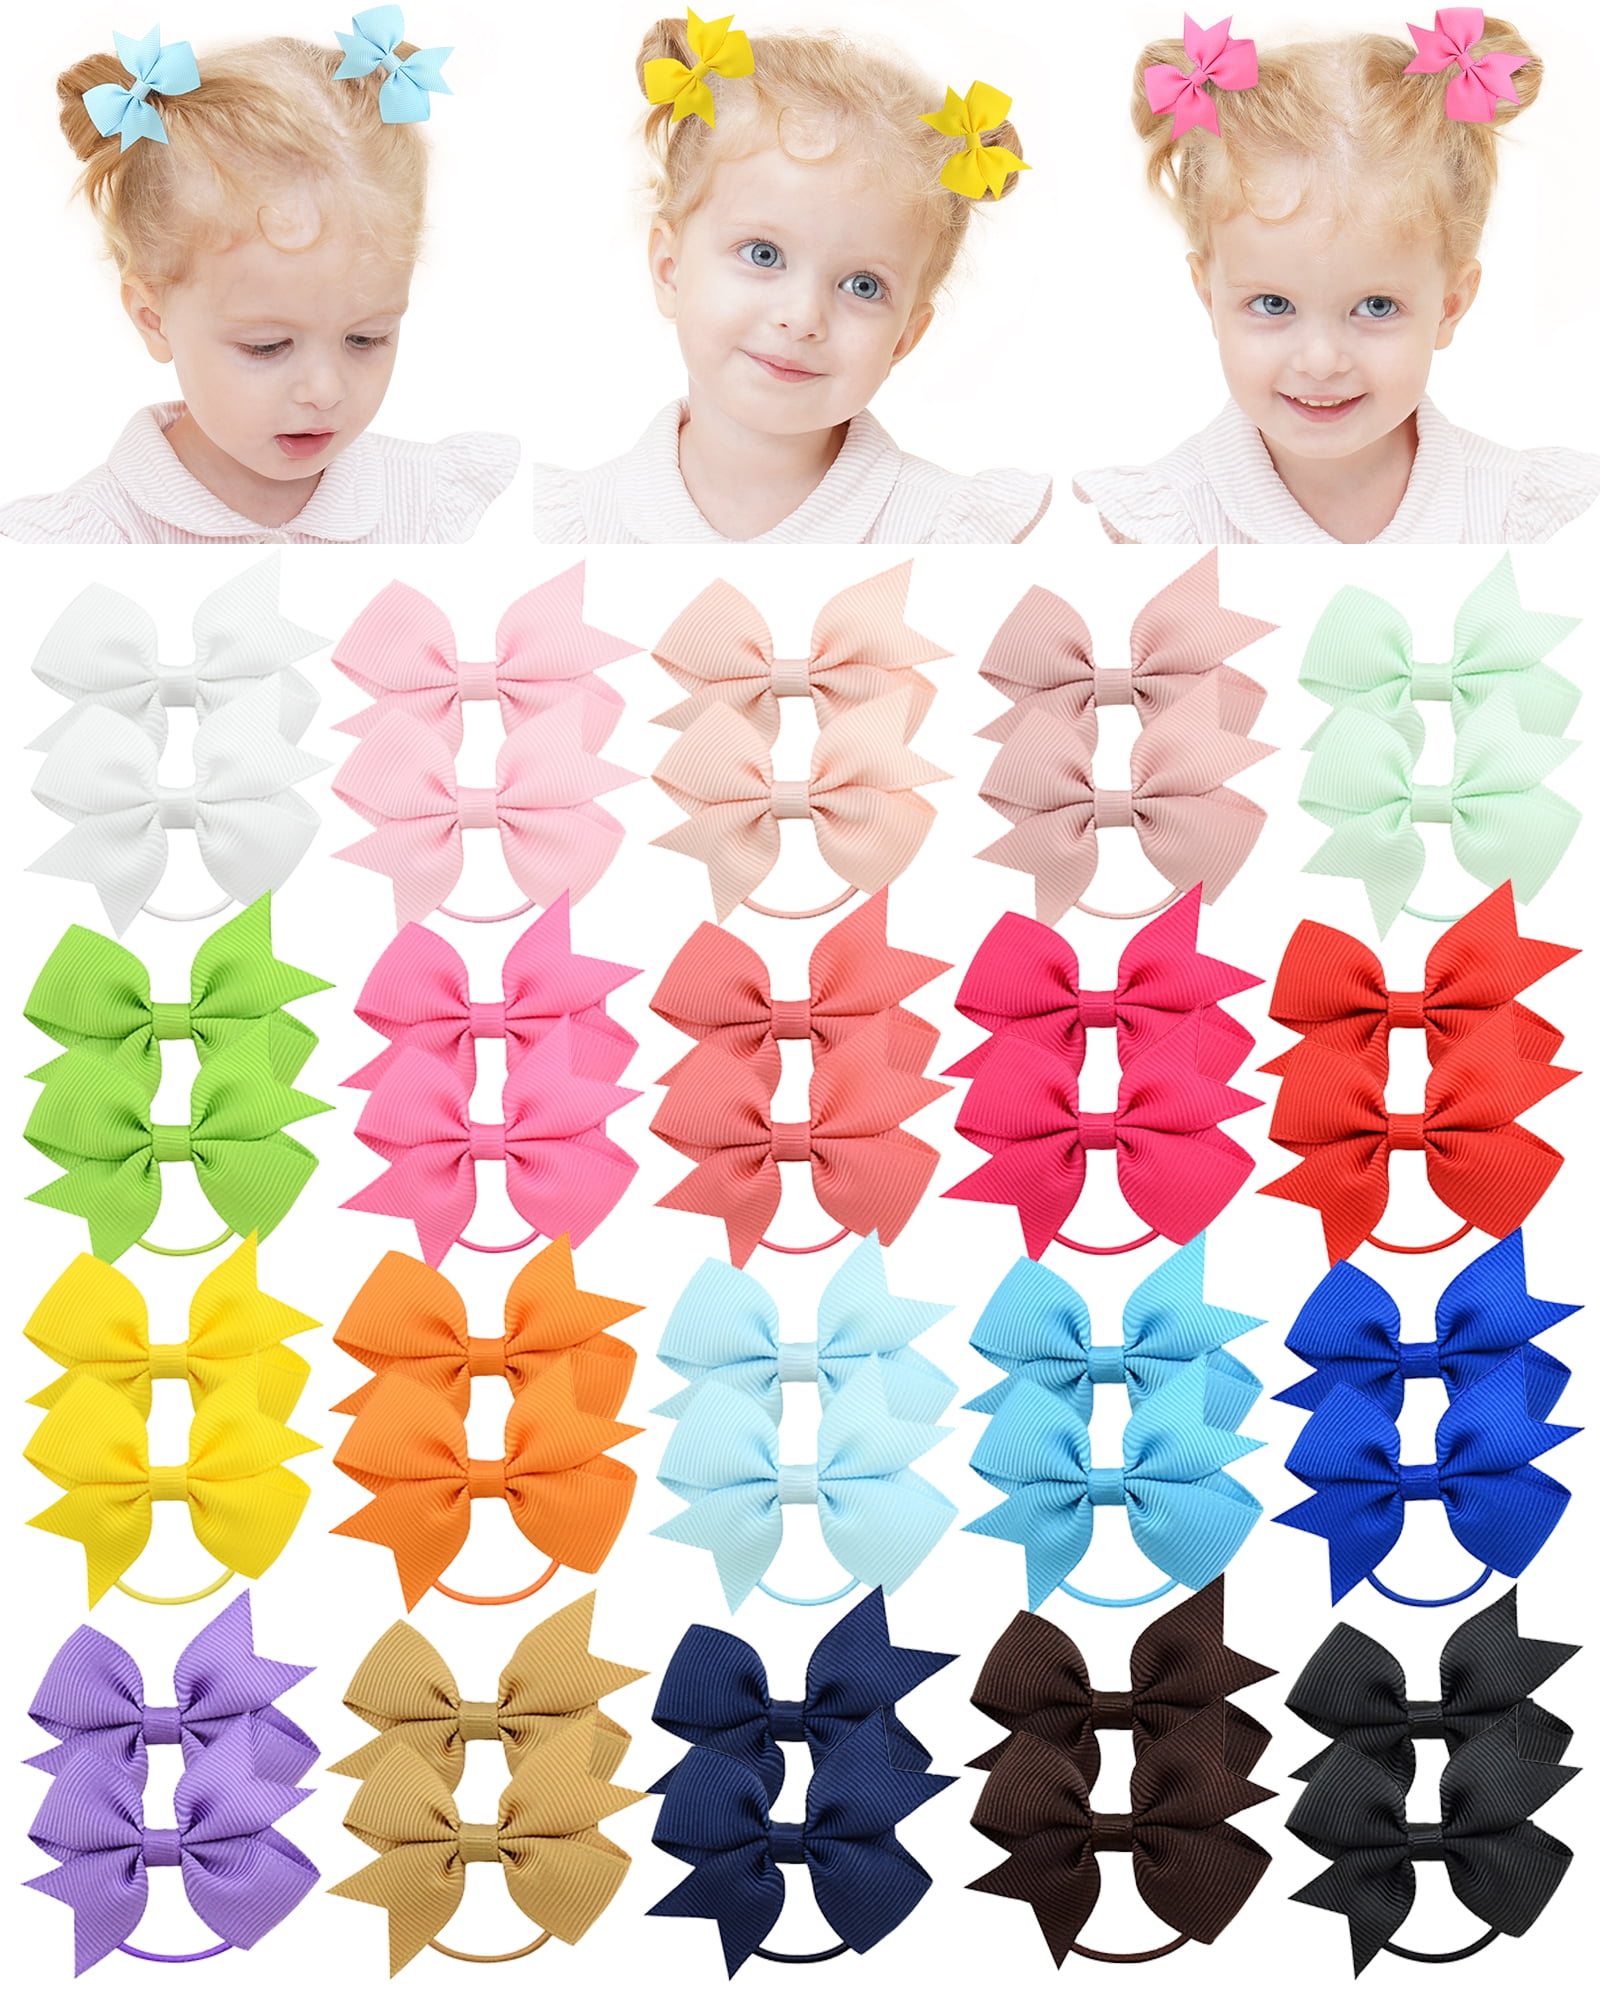 40 Girls Hair Bows 20 Colors 2.5 Boutique Clips For Girls Toddlers Kid NEW